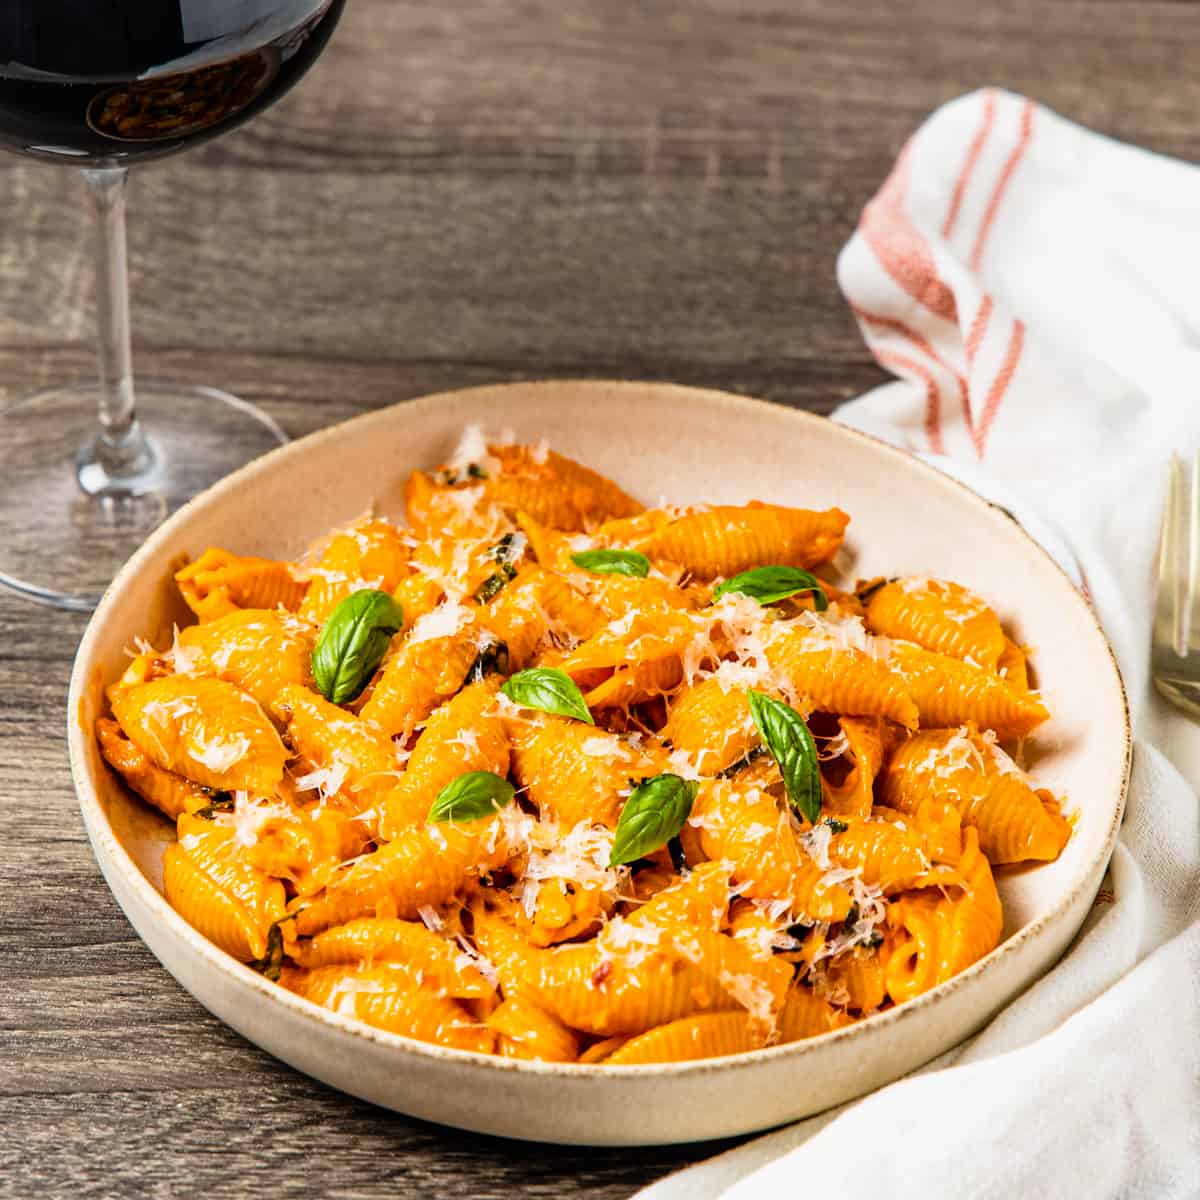 A large bowl of spicy pasta alla vodka served with a glass of red wine.